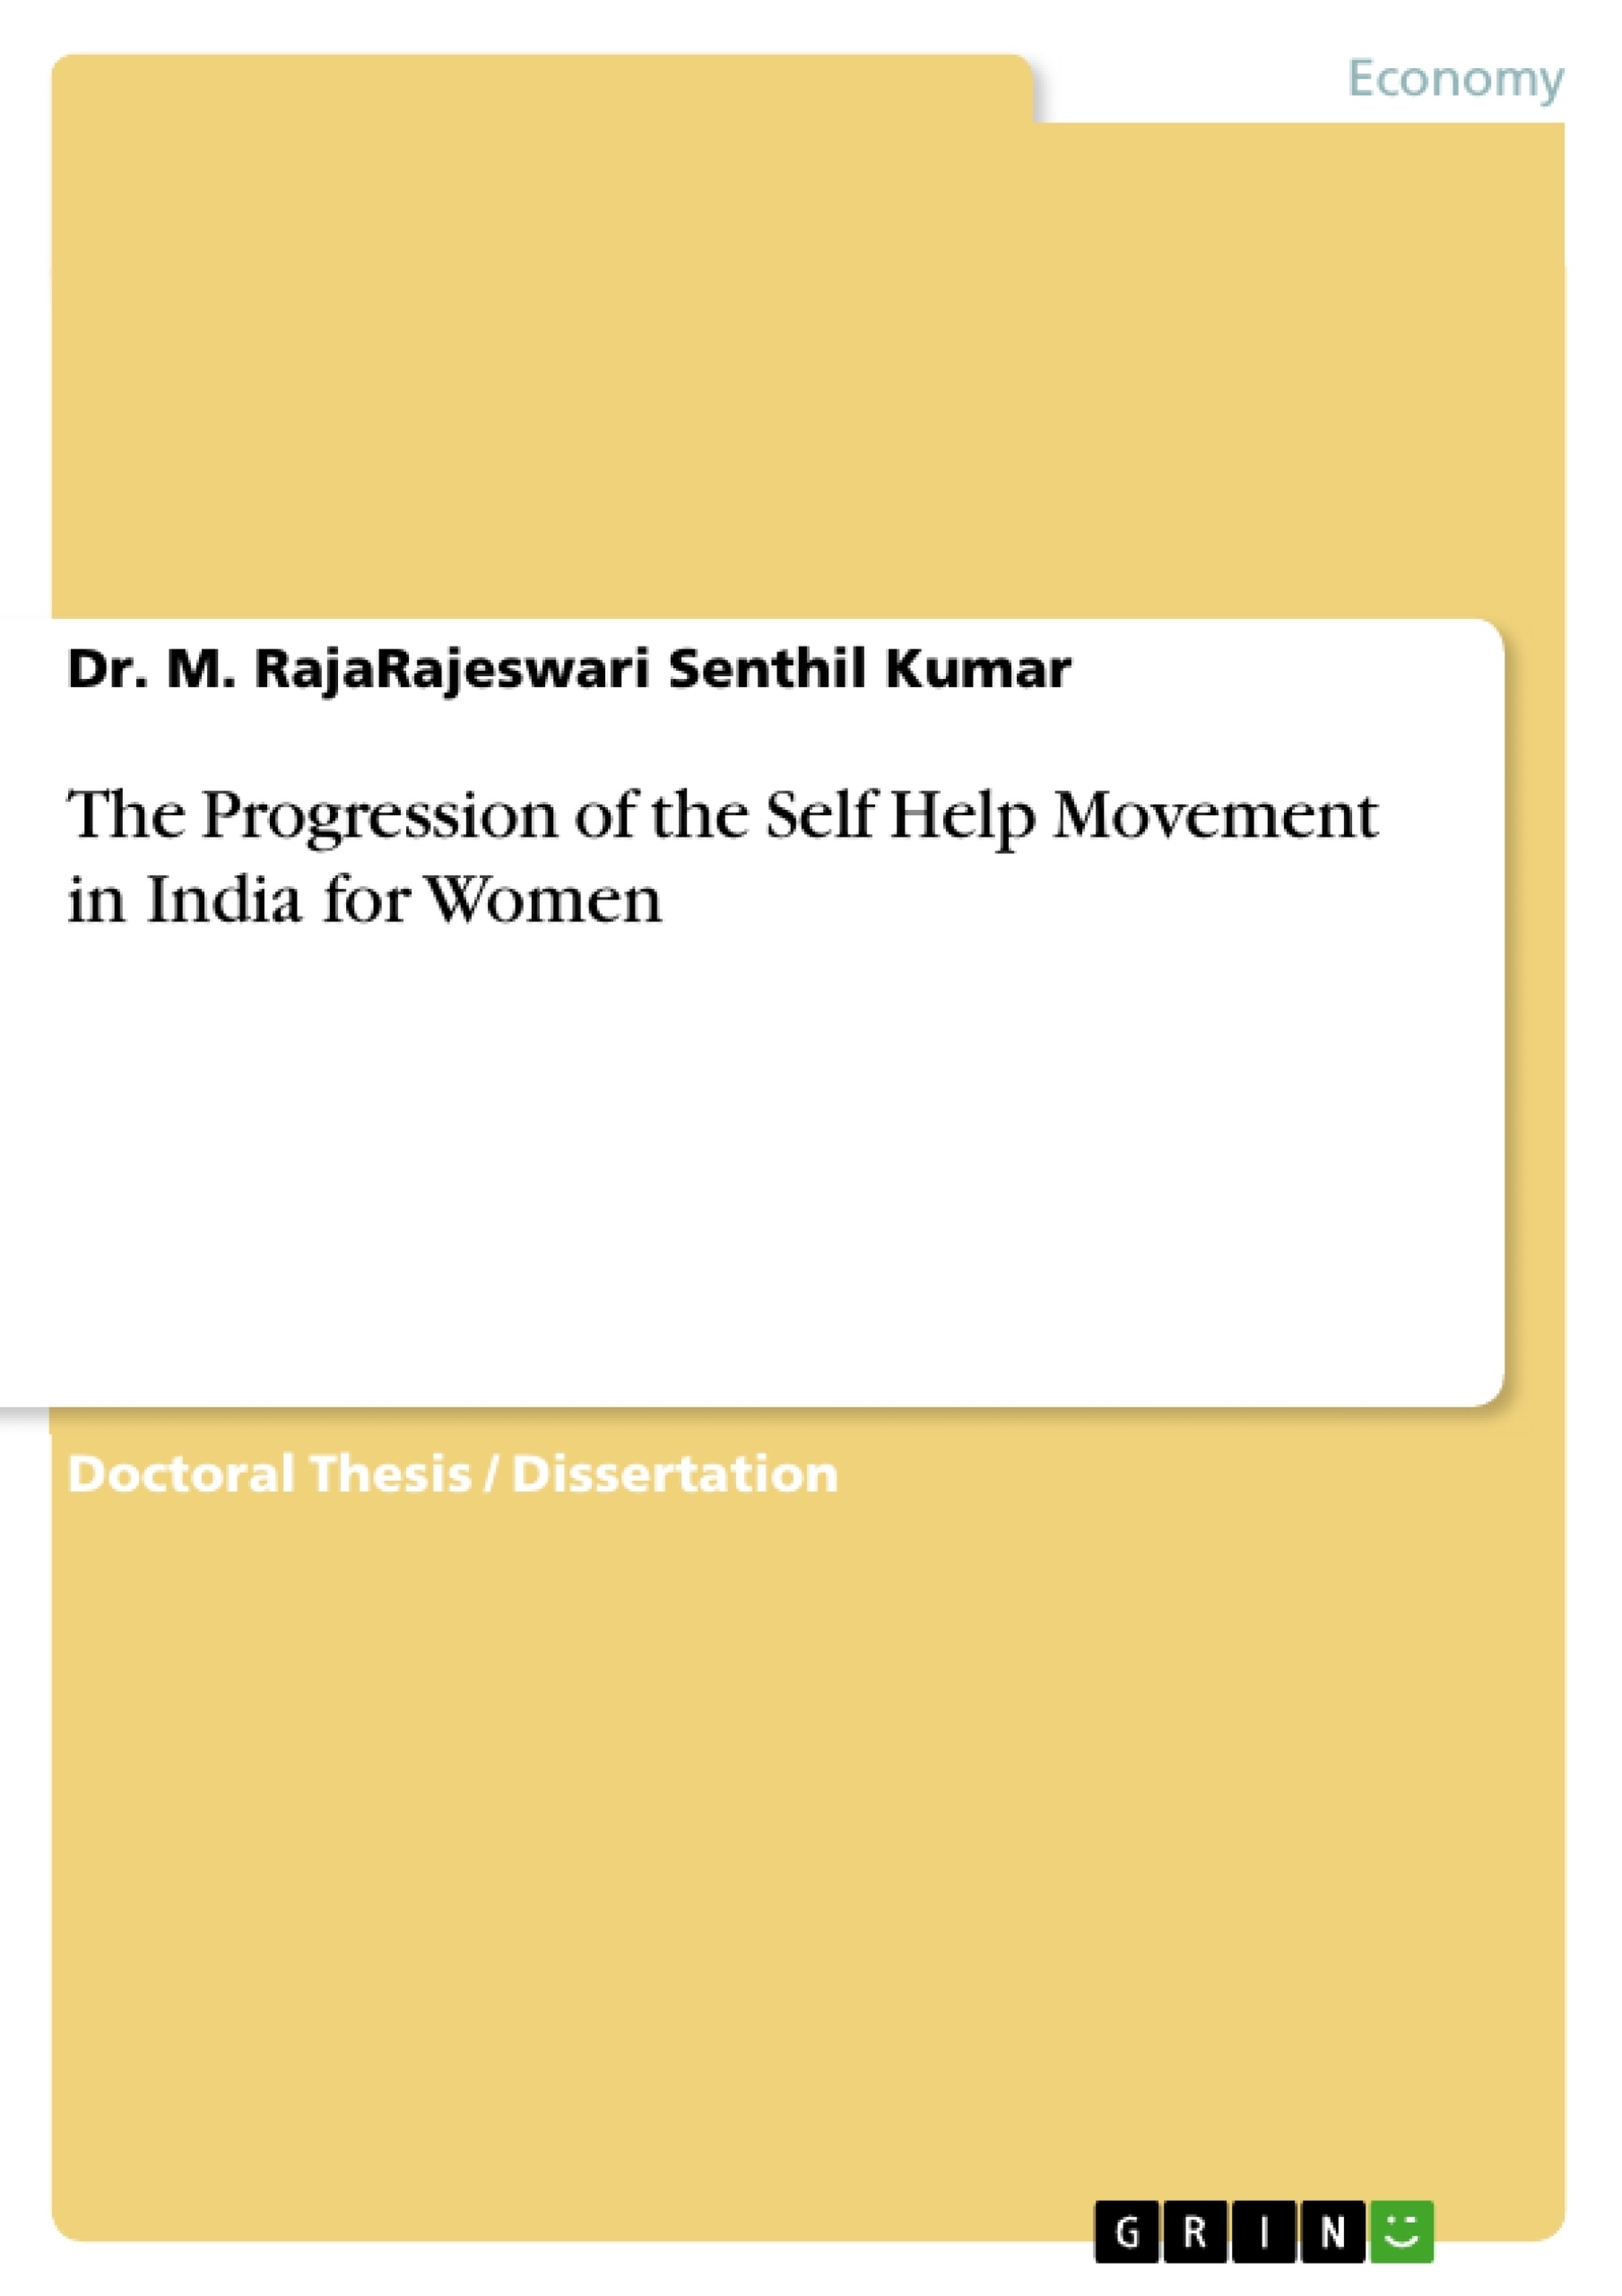 Titre: The Progression of the Self Help Movement in India for Women